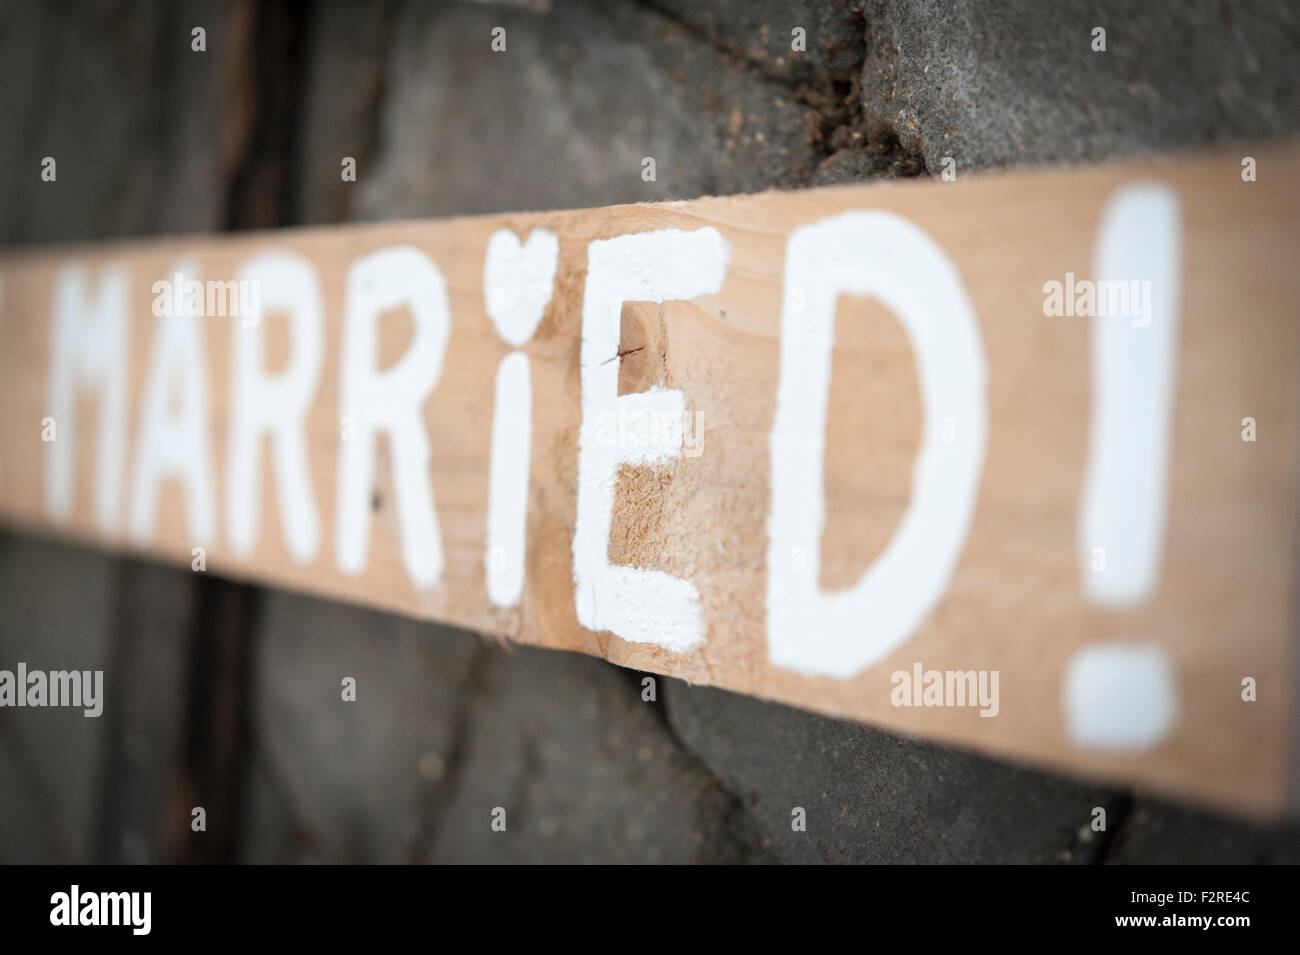 A handmade wooden wedding sign with the word married painted on it Stock Photo